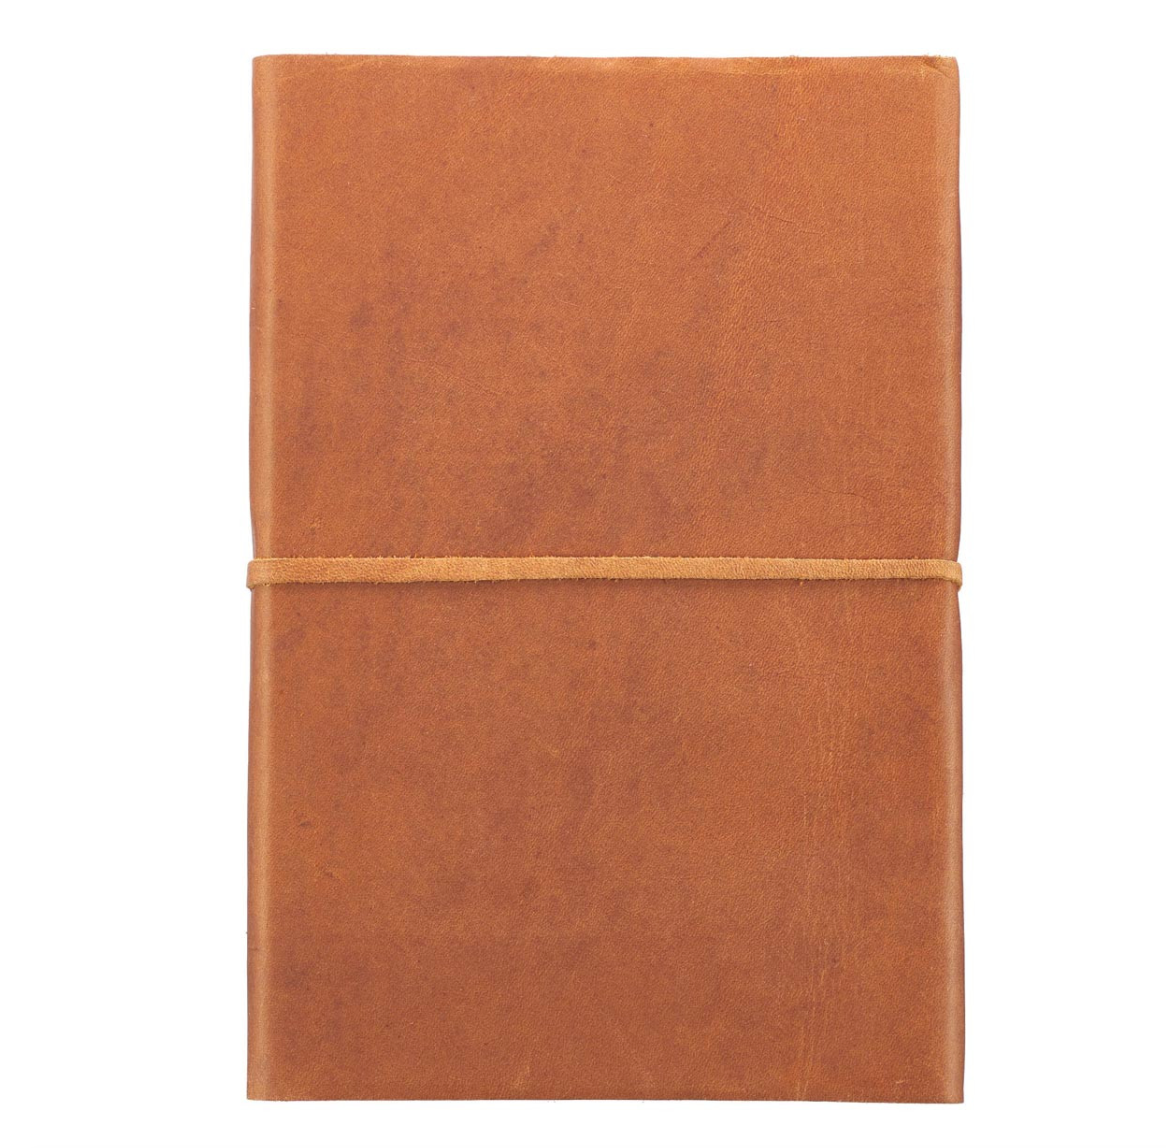 In the Beginning Classic Full Grain Leather Journal with Wrap Closure – John 1:1-14